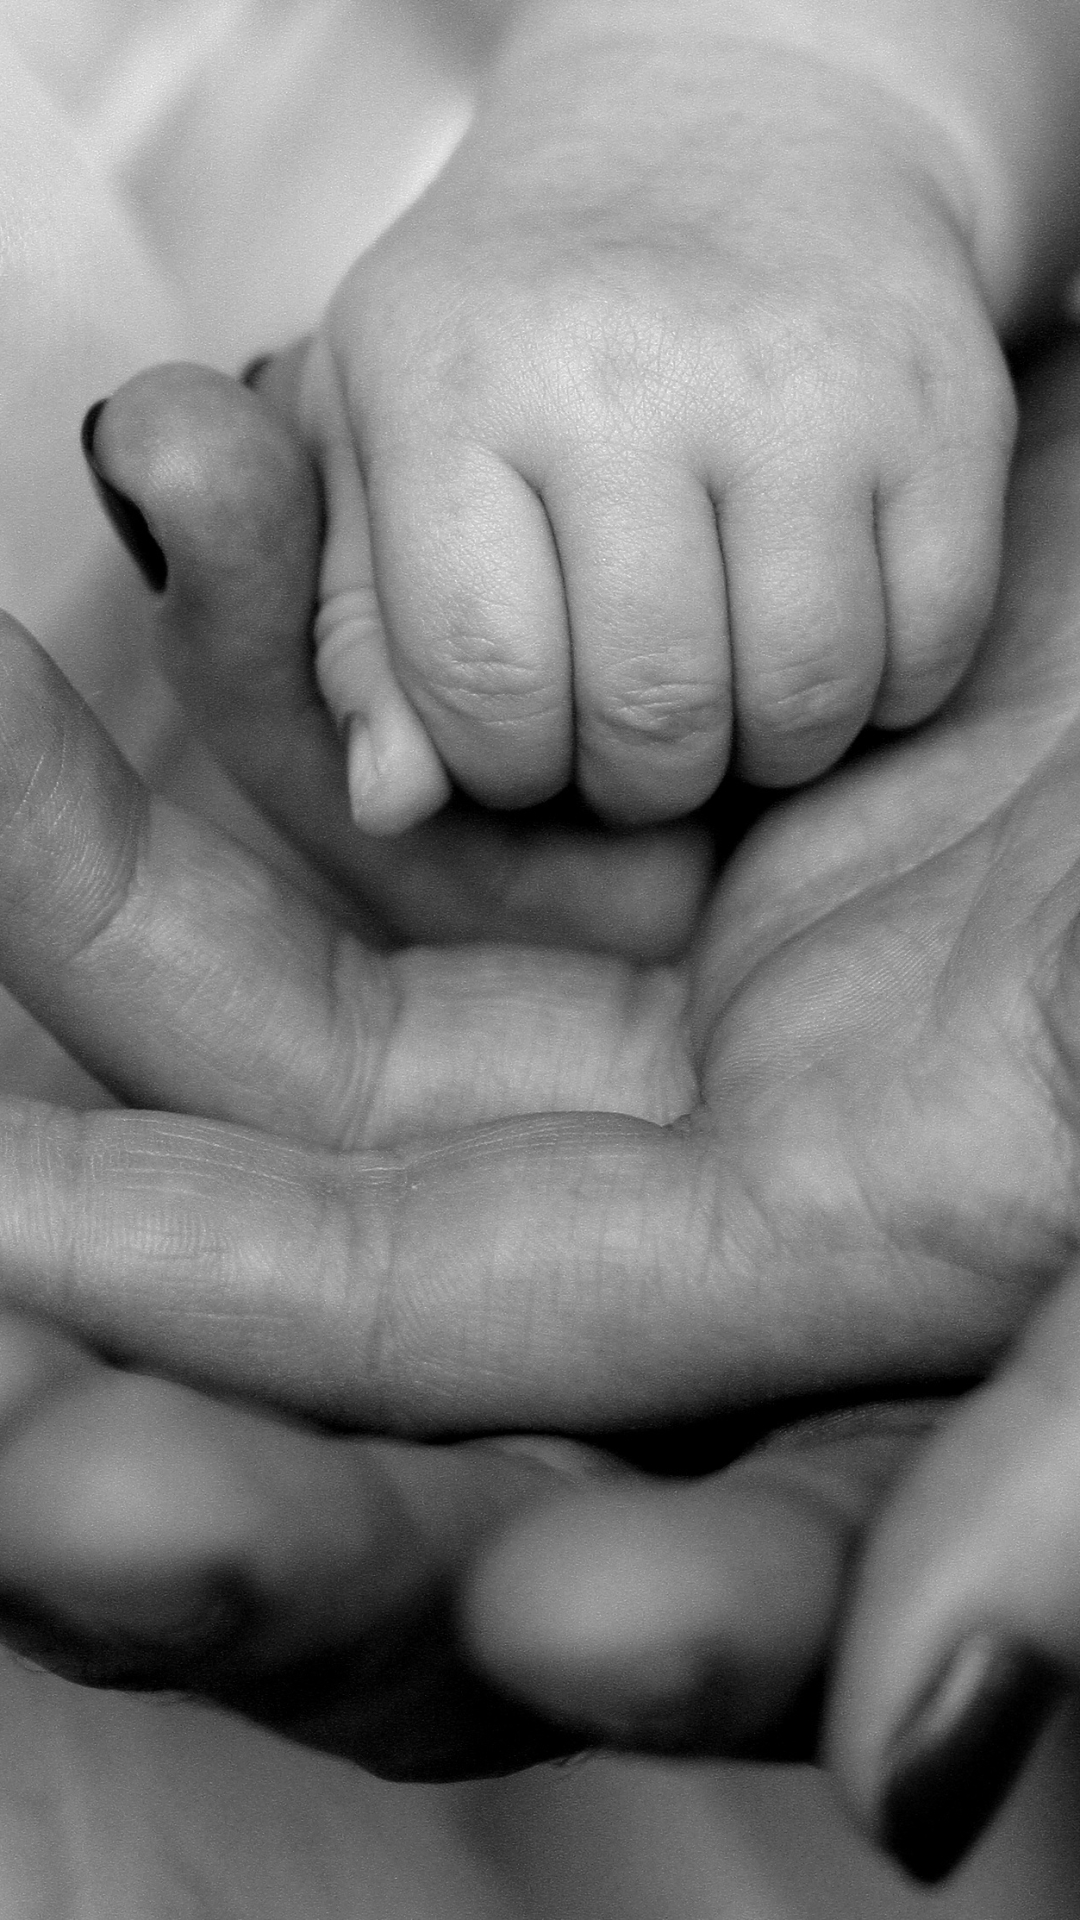 Father, Mother and Baby's Hands by AdinaVoicu